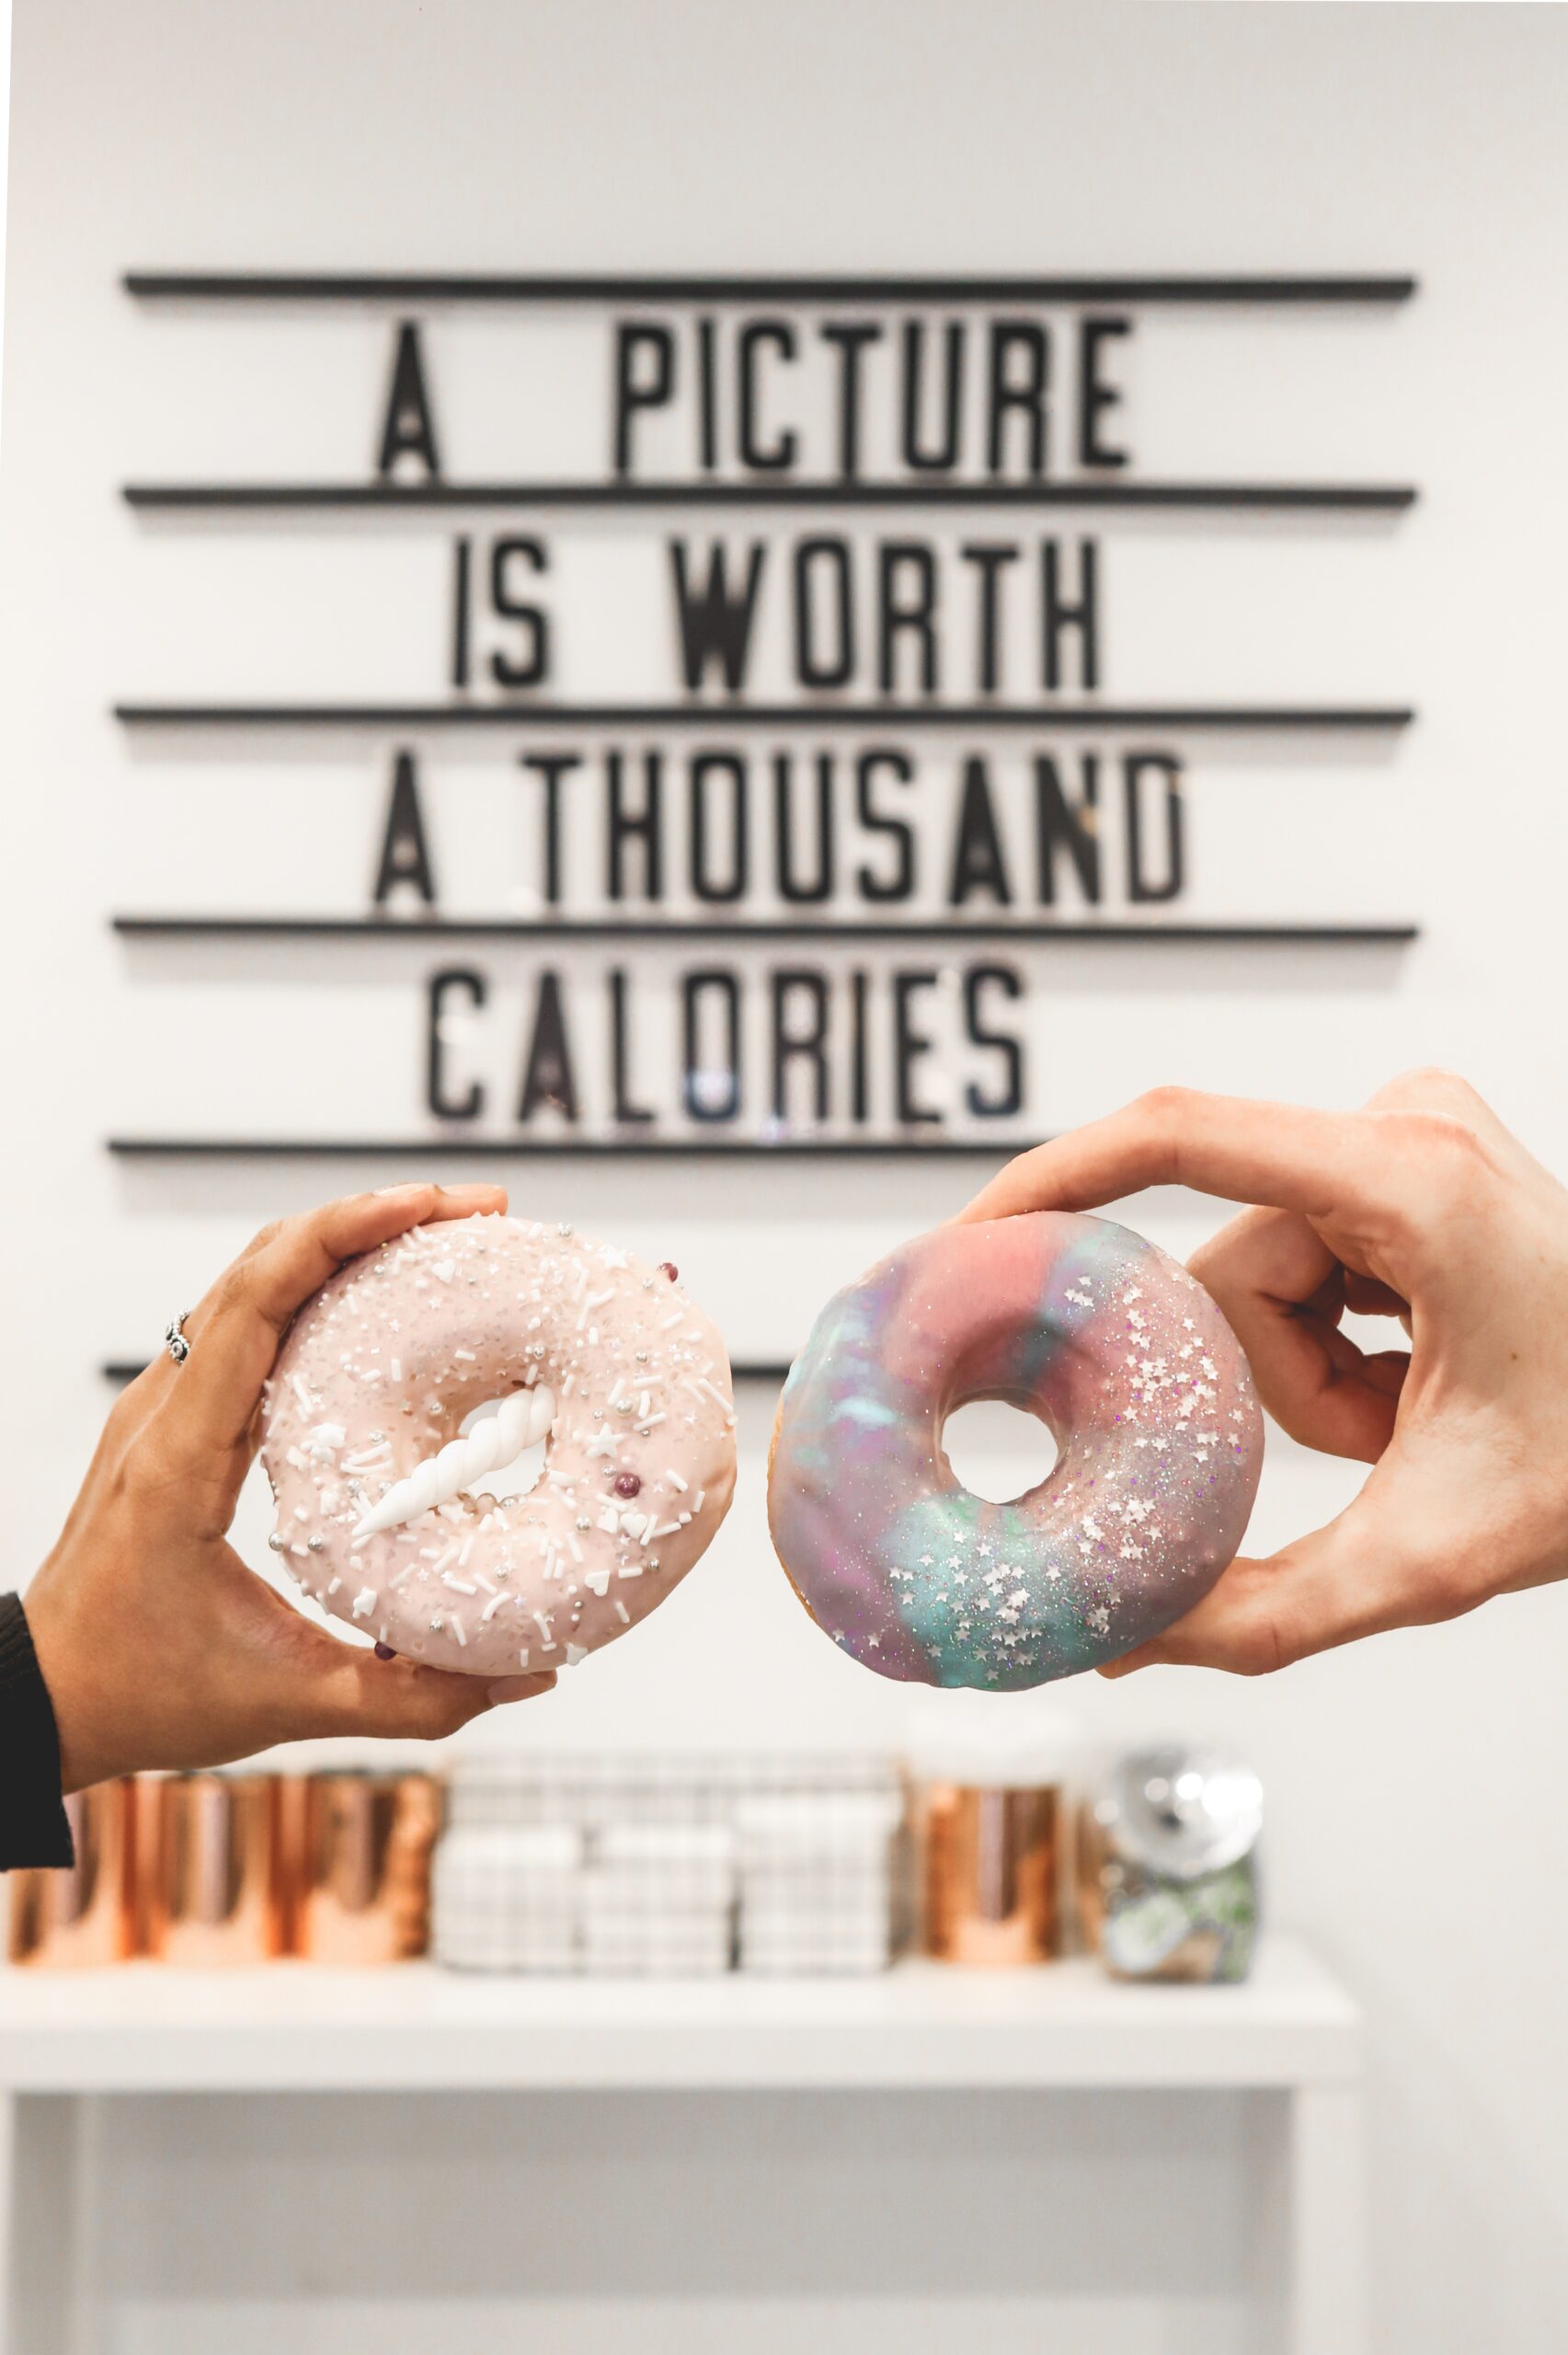 Two doughnuts with text saying "a picture is worth a thousand ca